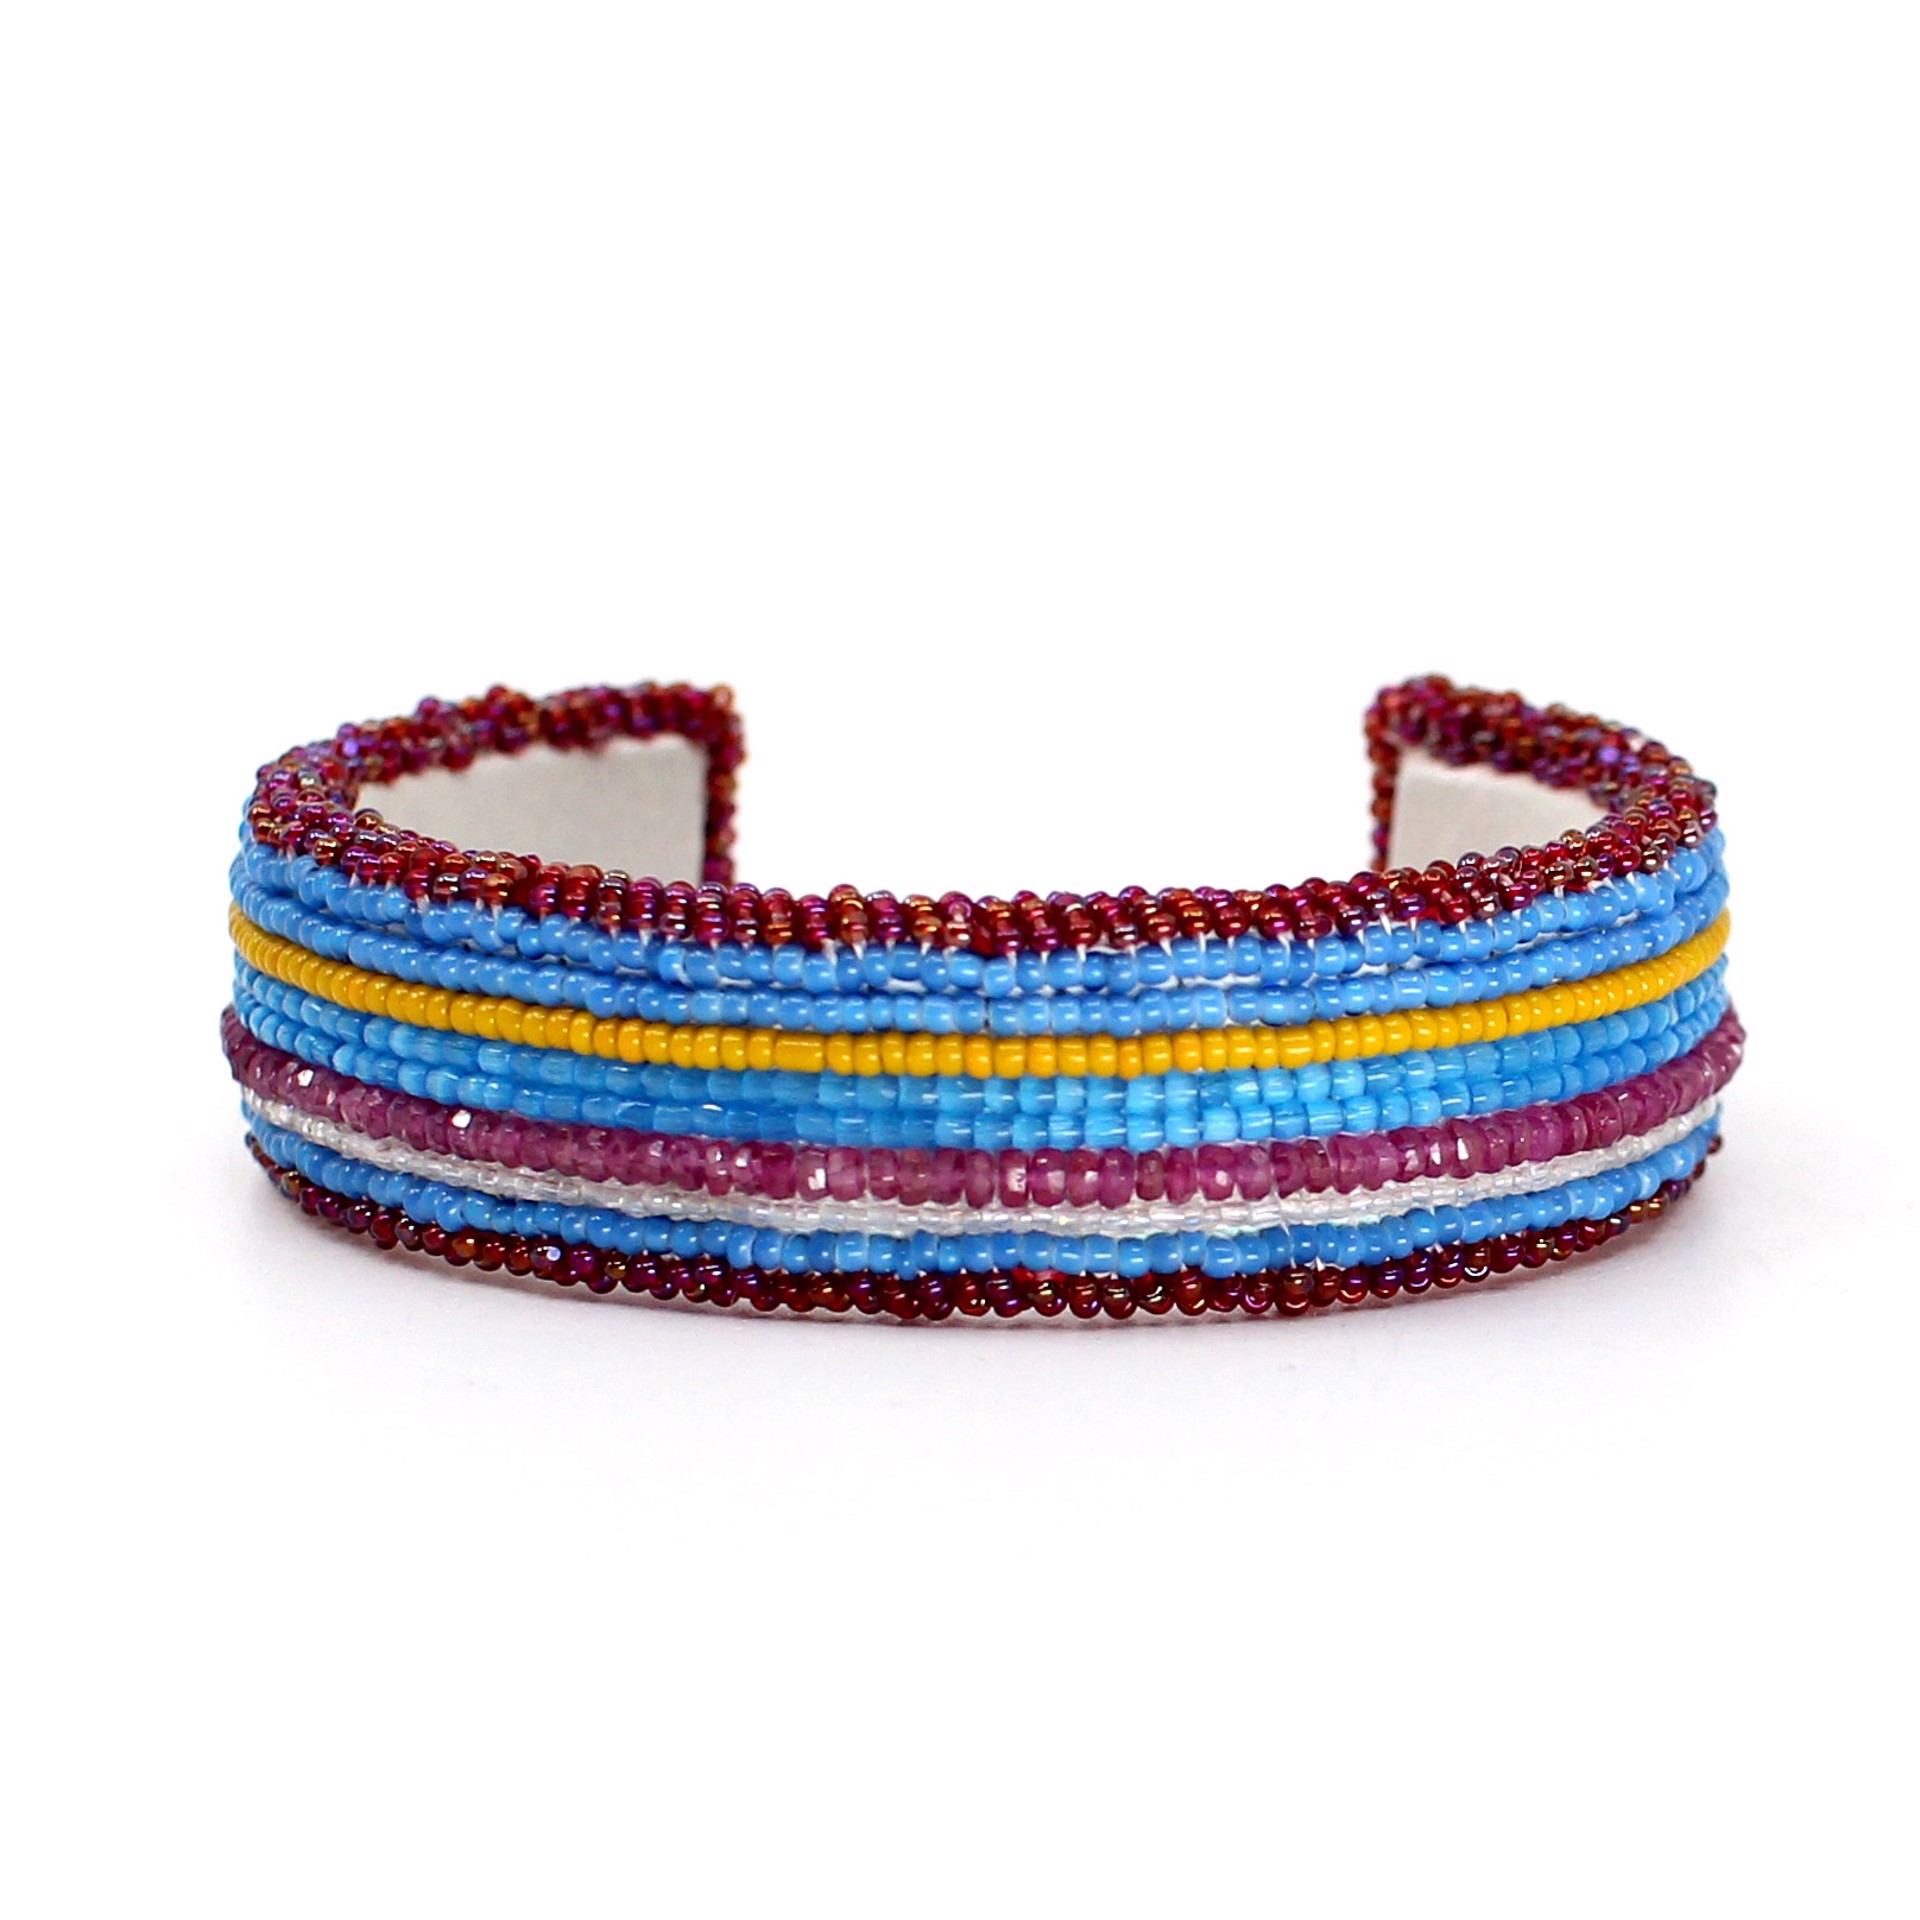 Beaded Ruby Bracelet by Hollis Chitto